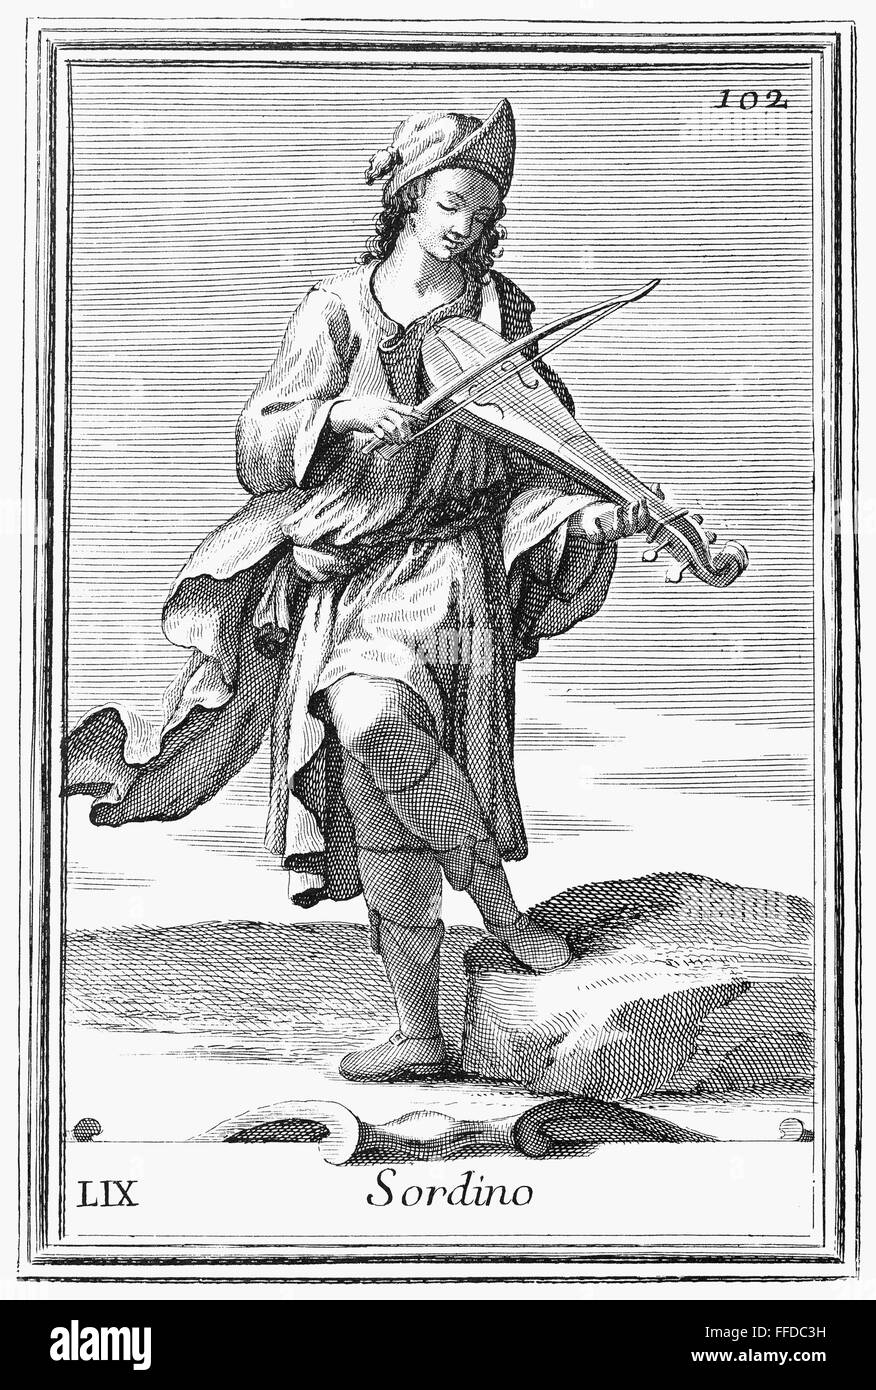 KIT, 1723. /nA man playing a kit, or dancing master's fiddle. Copper engraving, 1723, by Arnold van Westerhout. Stock Photo